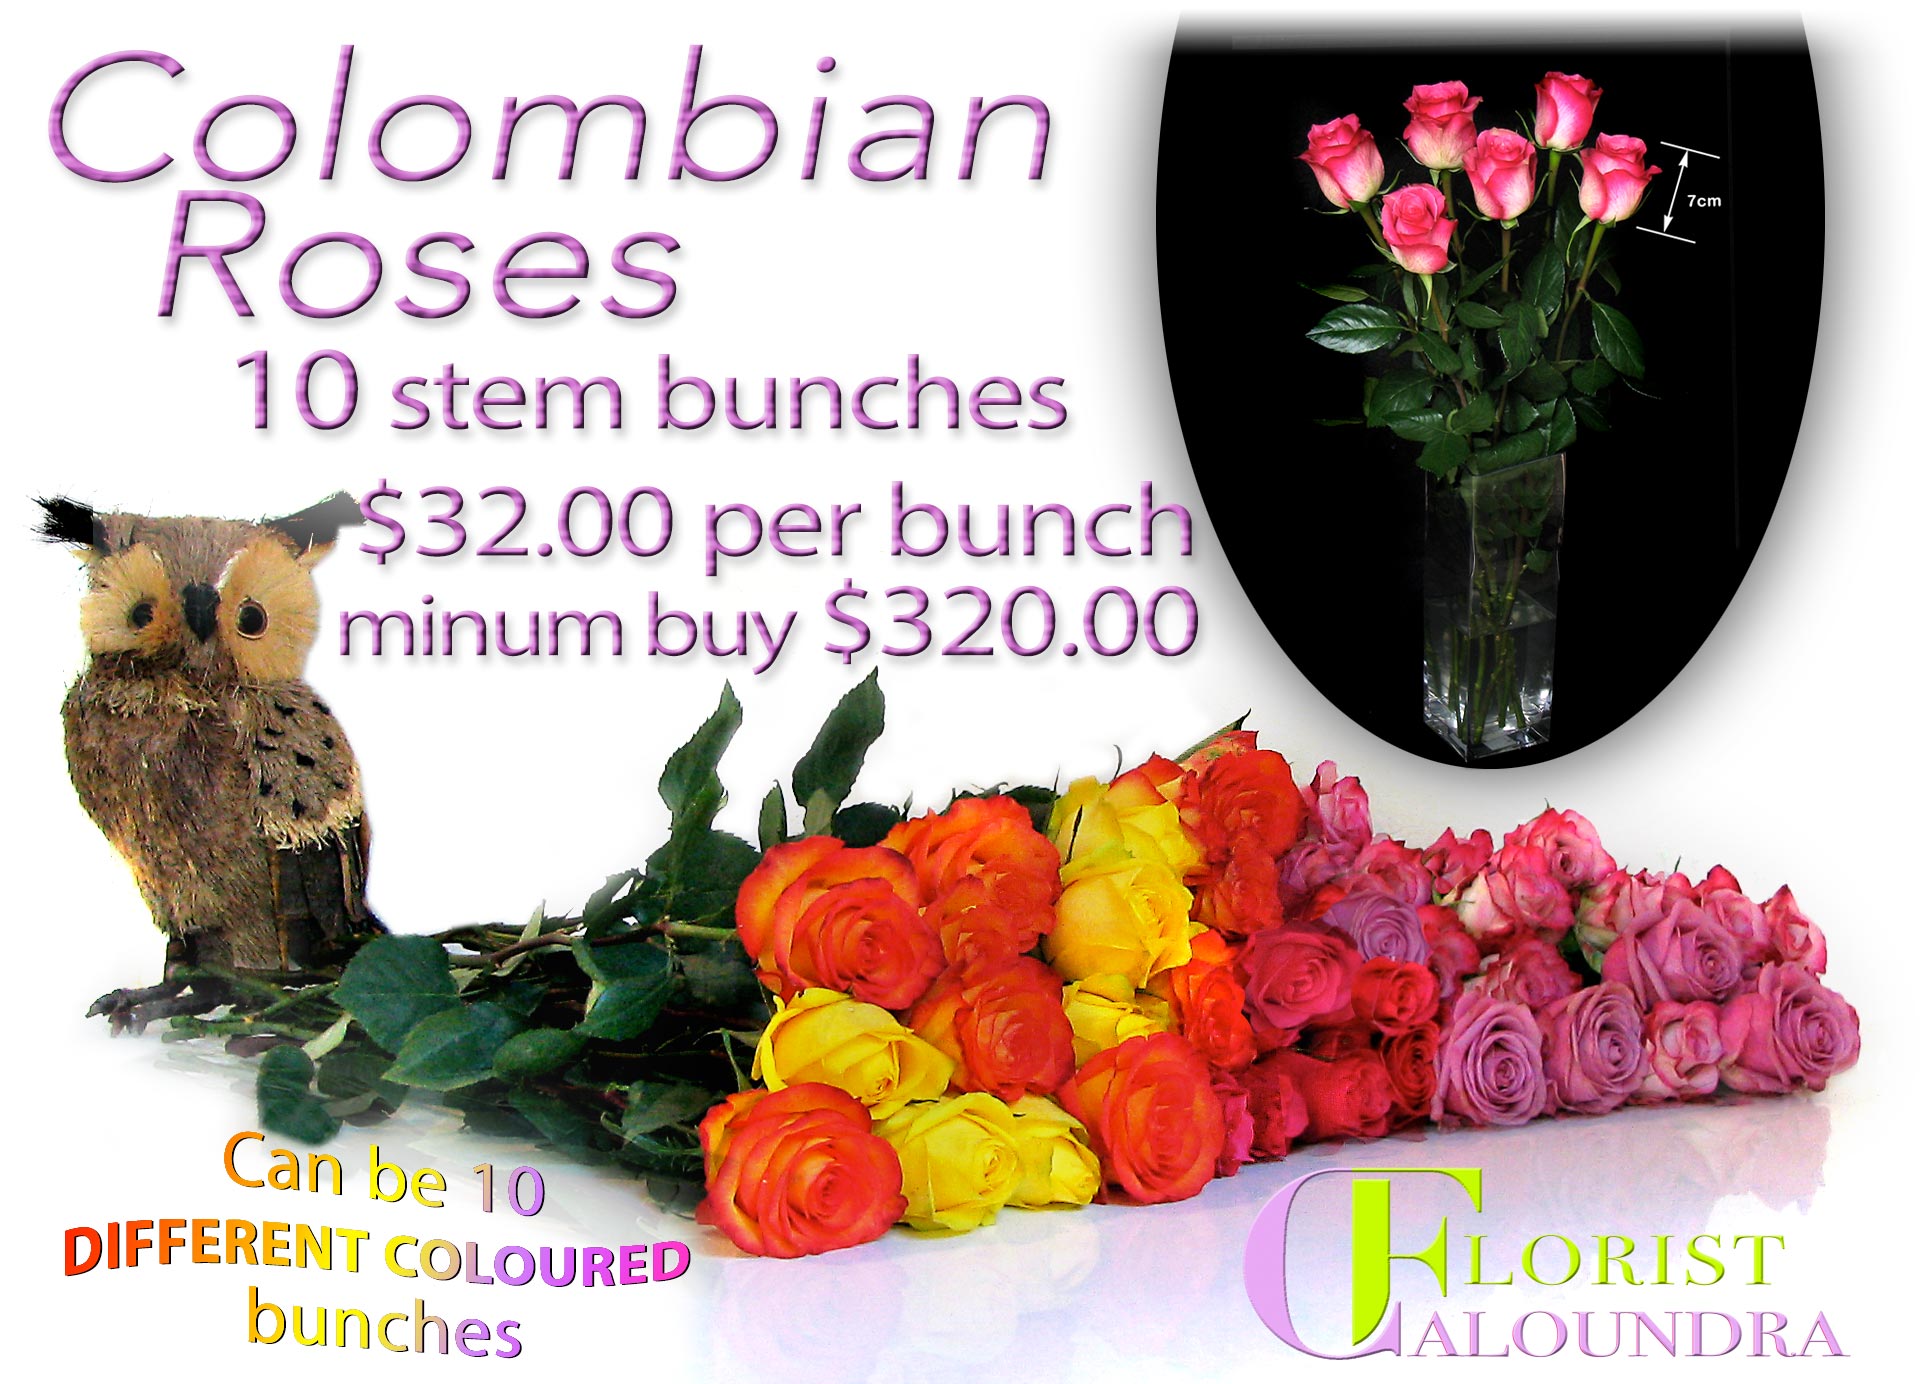 COLOMBIAN ROSES BY CALOUNDRA FLORIST